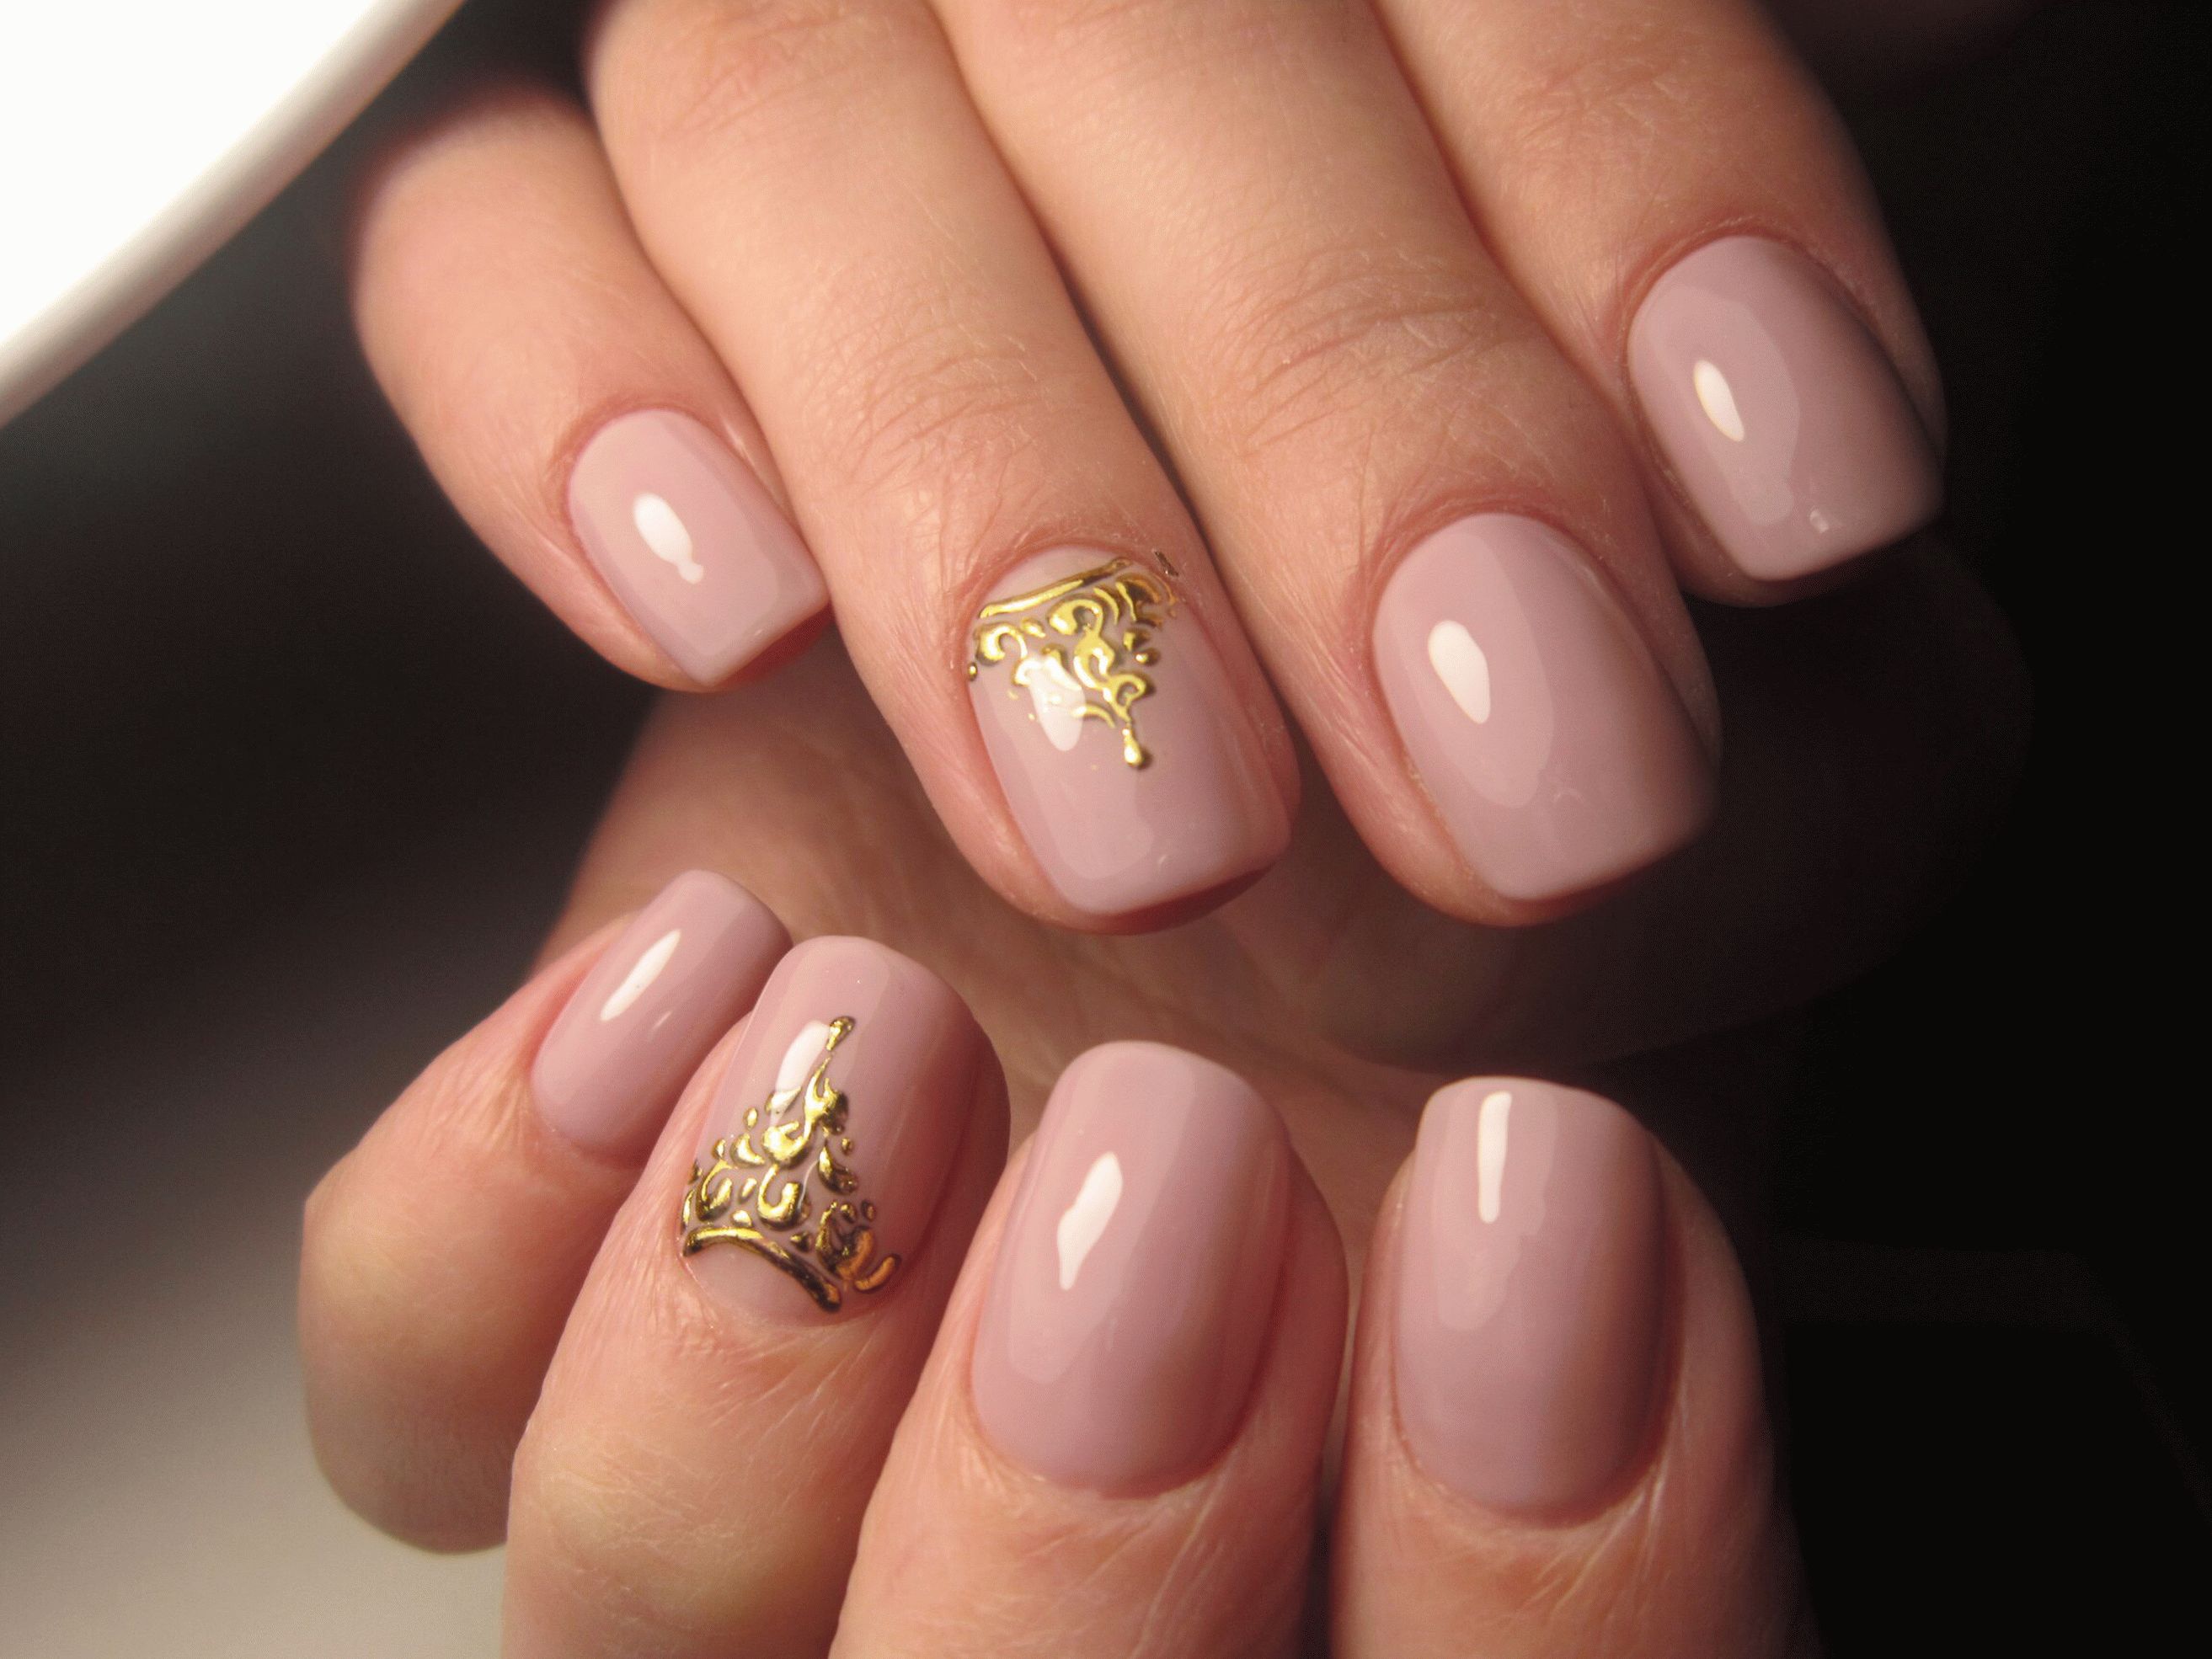 Nude manicure for the winter